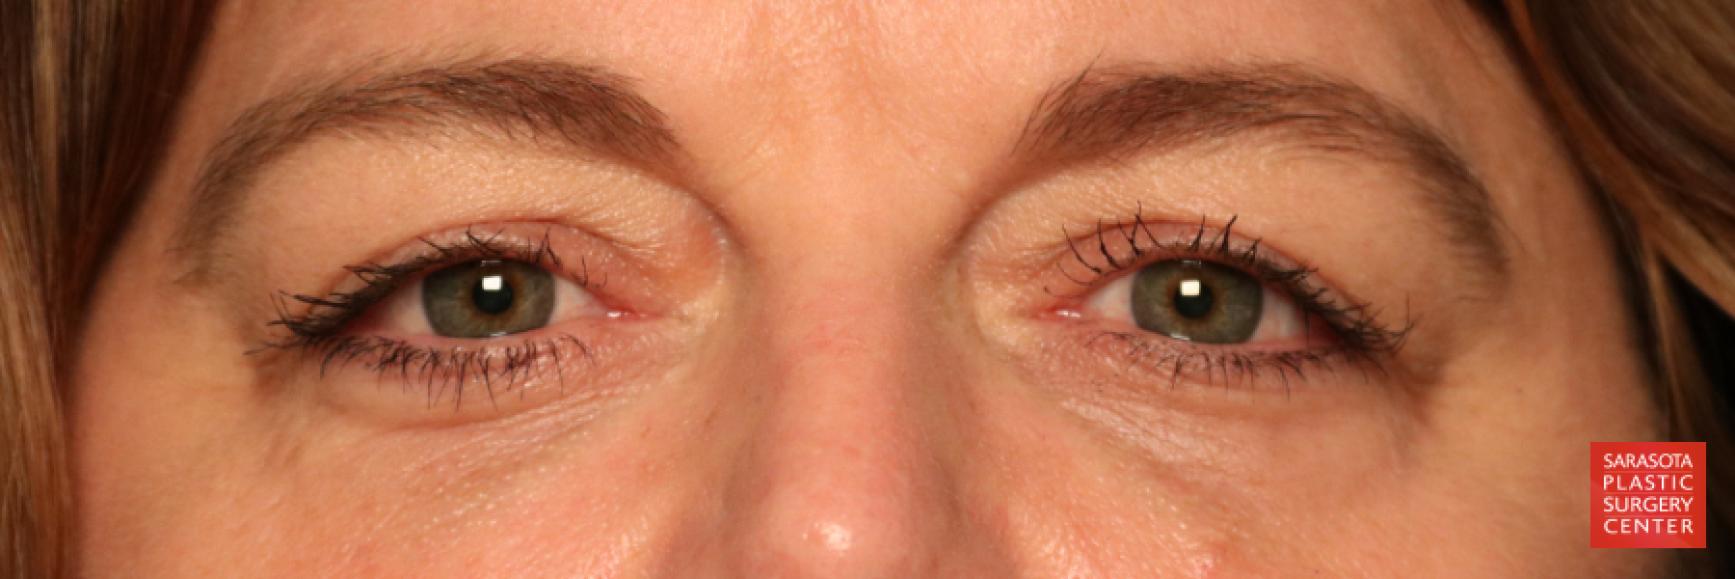 Eyelid Lift: Patient 5 - Before 